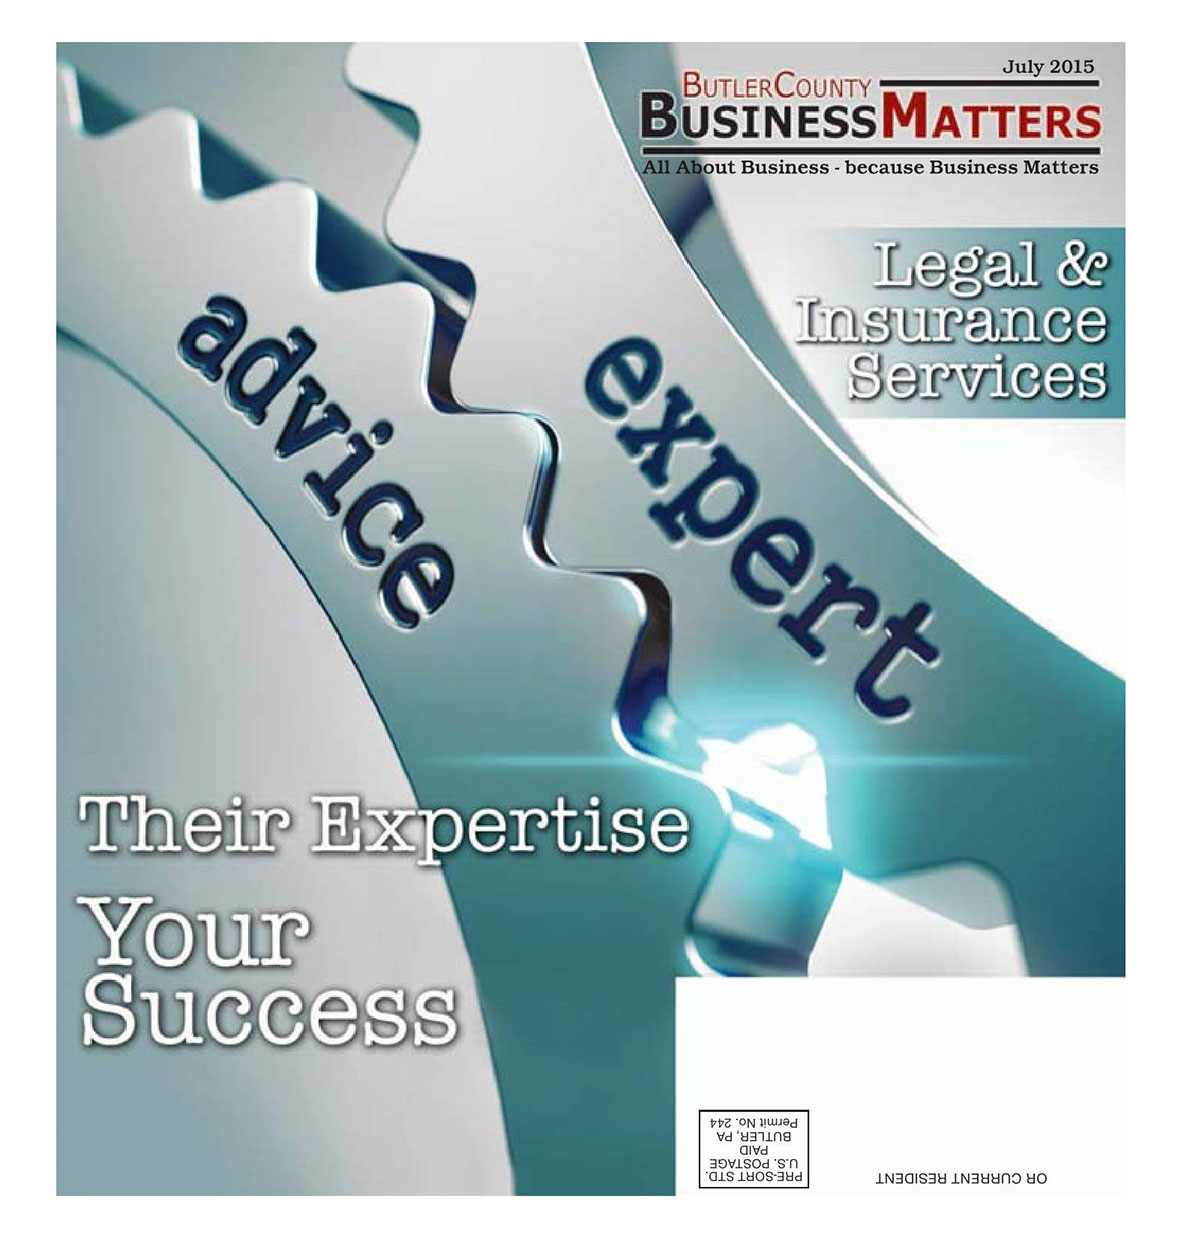 July 2015 - Legal & Insurance Services - Expert Advice - Their Expertise Your Success